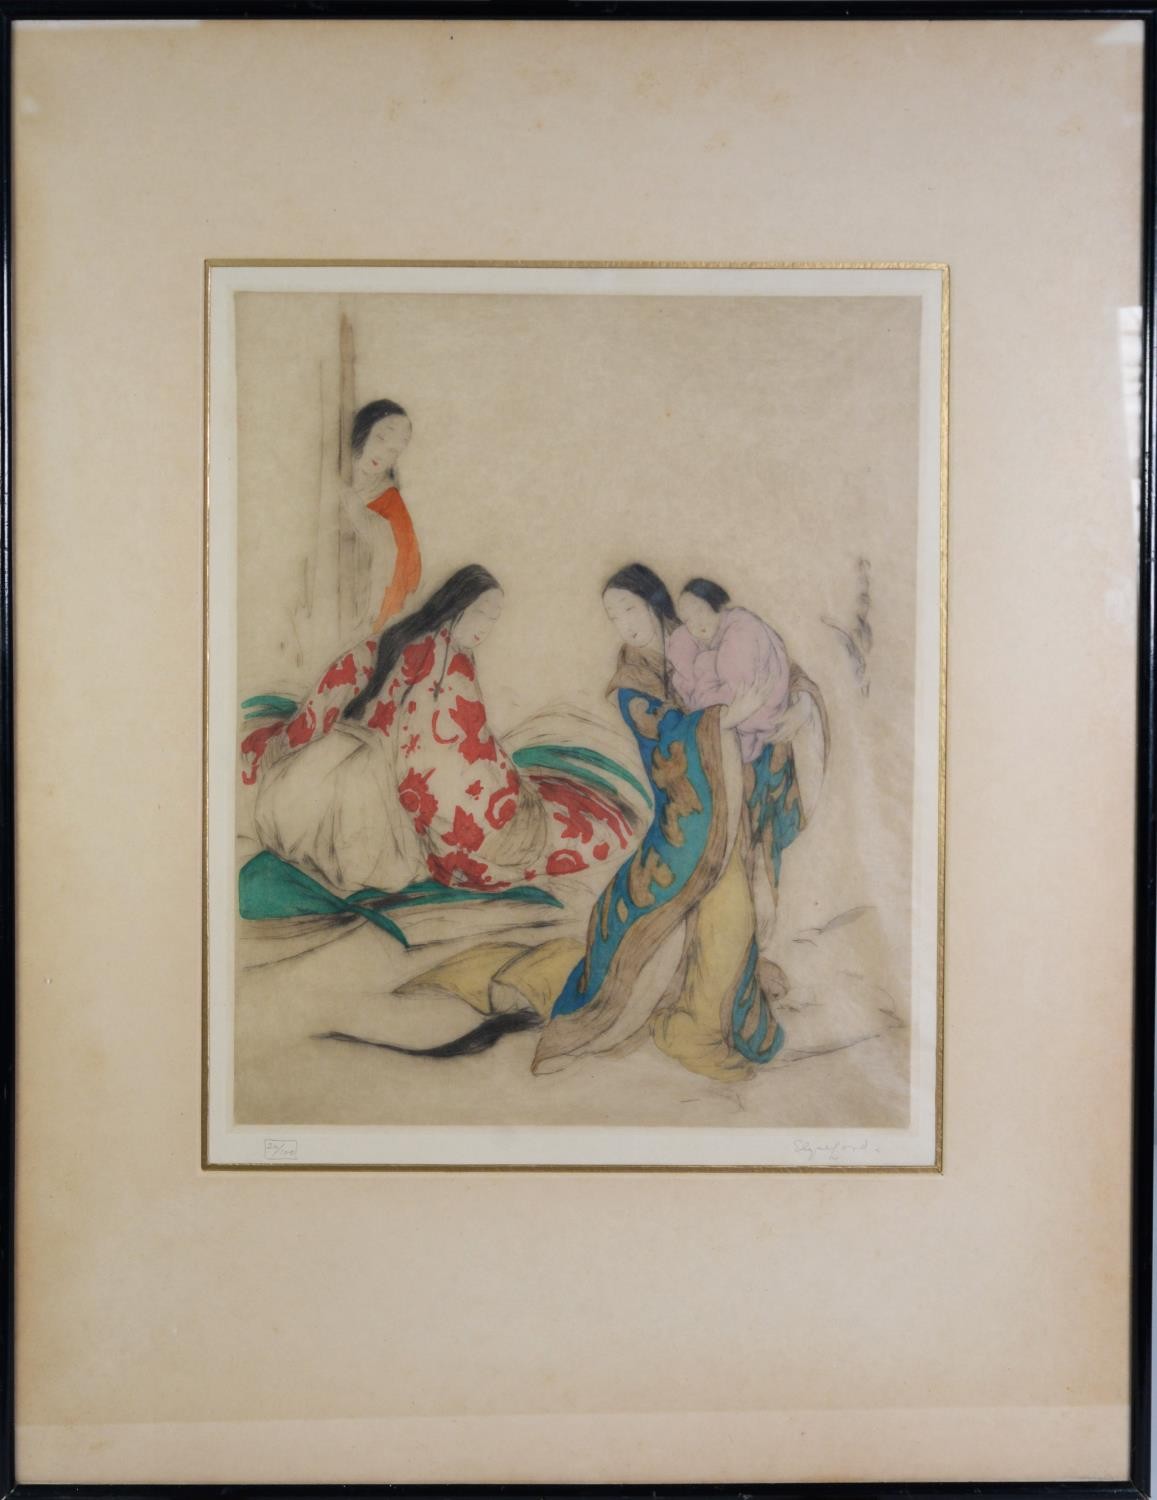 ELYSE ASHE LORD (1900-1971), hand-coloured drypoint etching ‘The New Baby’, signed and numbered 26/